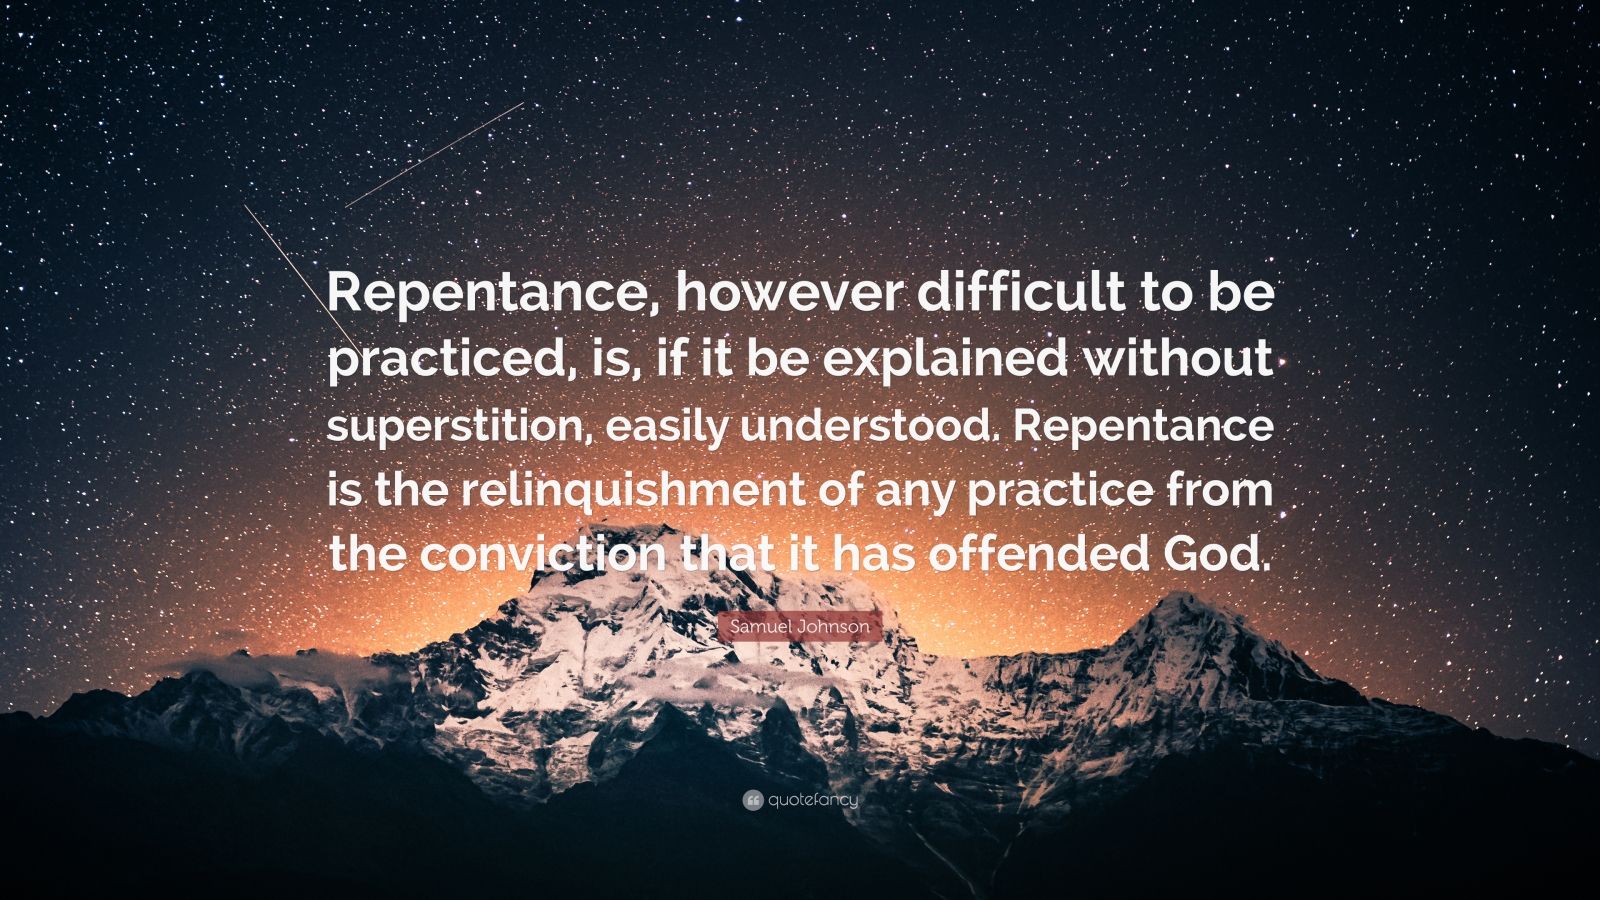 Samuel Johnson Quote: “Repentance, however difficult to be practiced